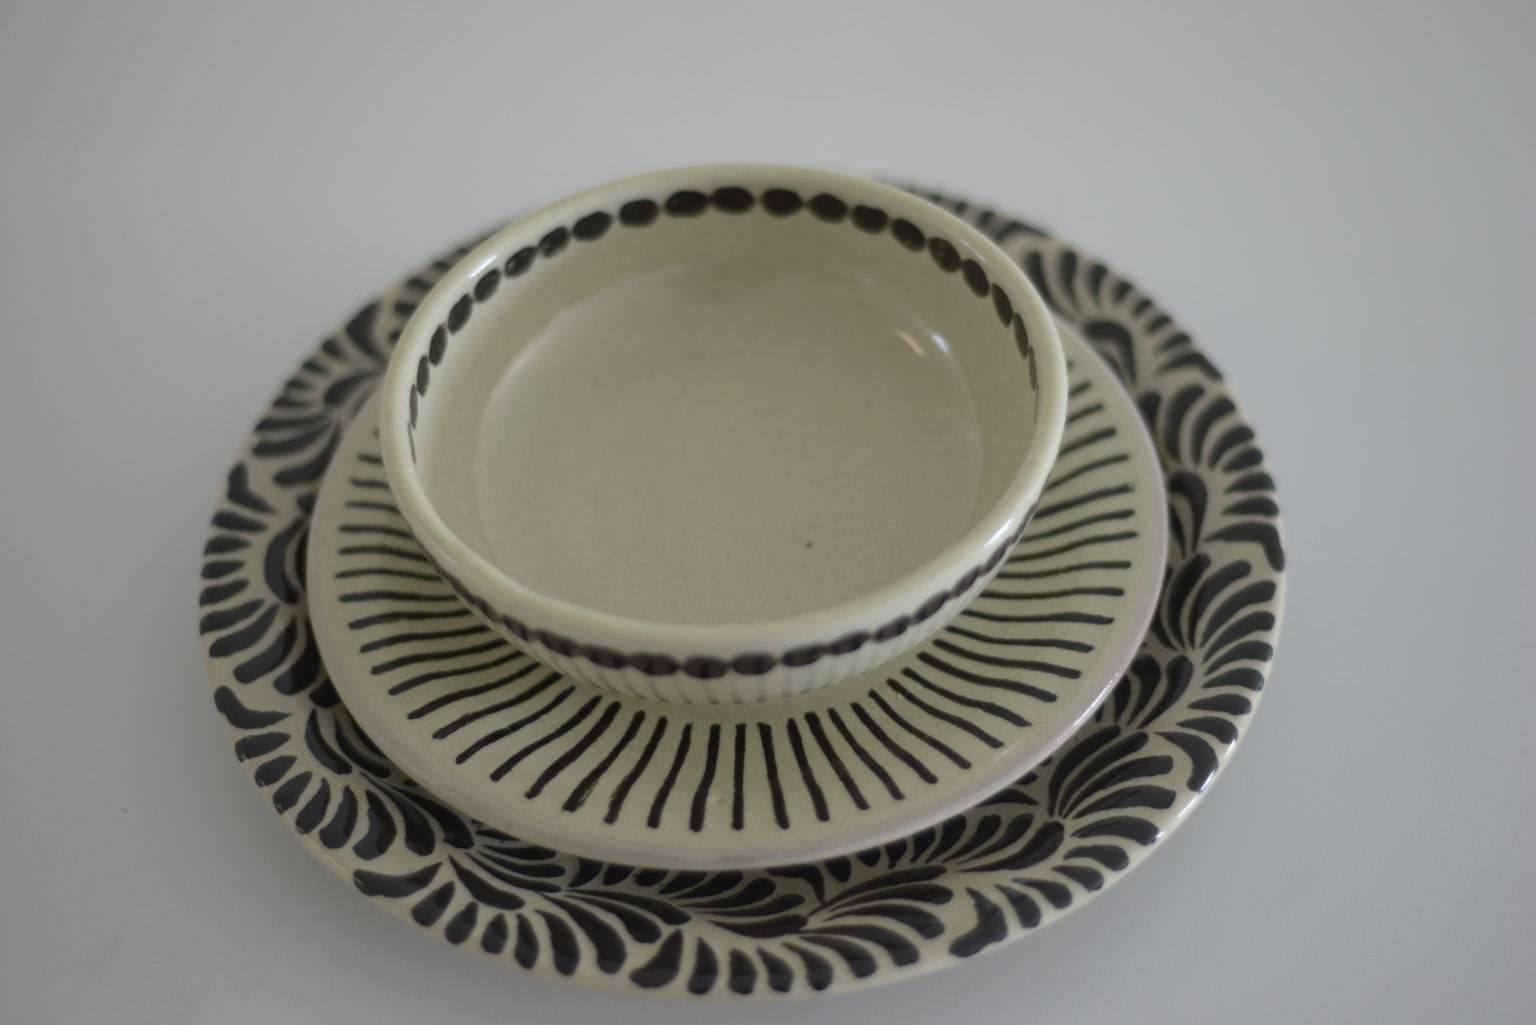 This dinnerware has four different designs which can be combined between them.

12 dinner plate, 27 cm.
12 salad plate, 20 cm.
12 soup bowl, 15 cm.
12 bread plate, 14 cm.
12 coffee cup, 7 cm.
12 espresso cup, 6 cm.
12 butter plate, 12